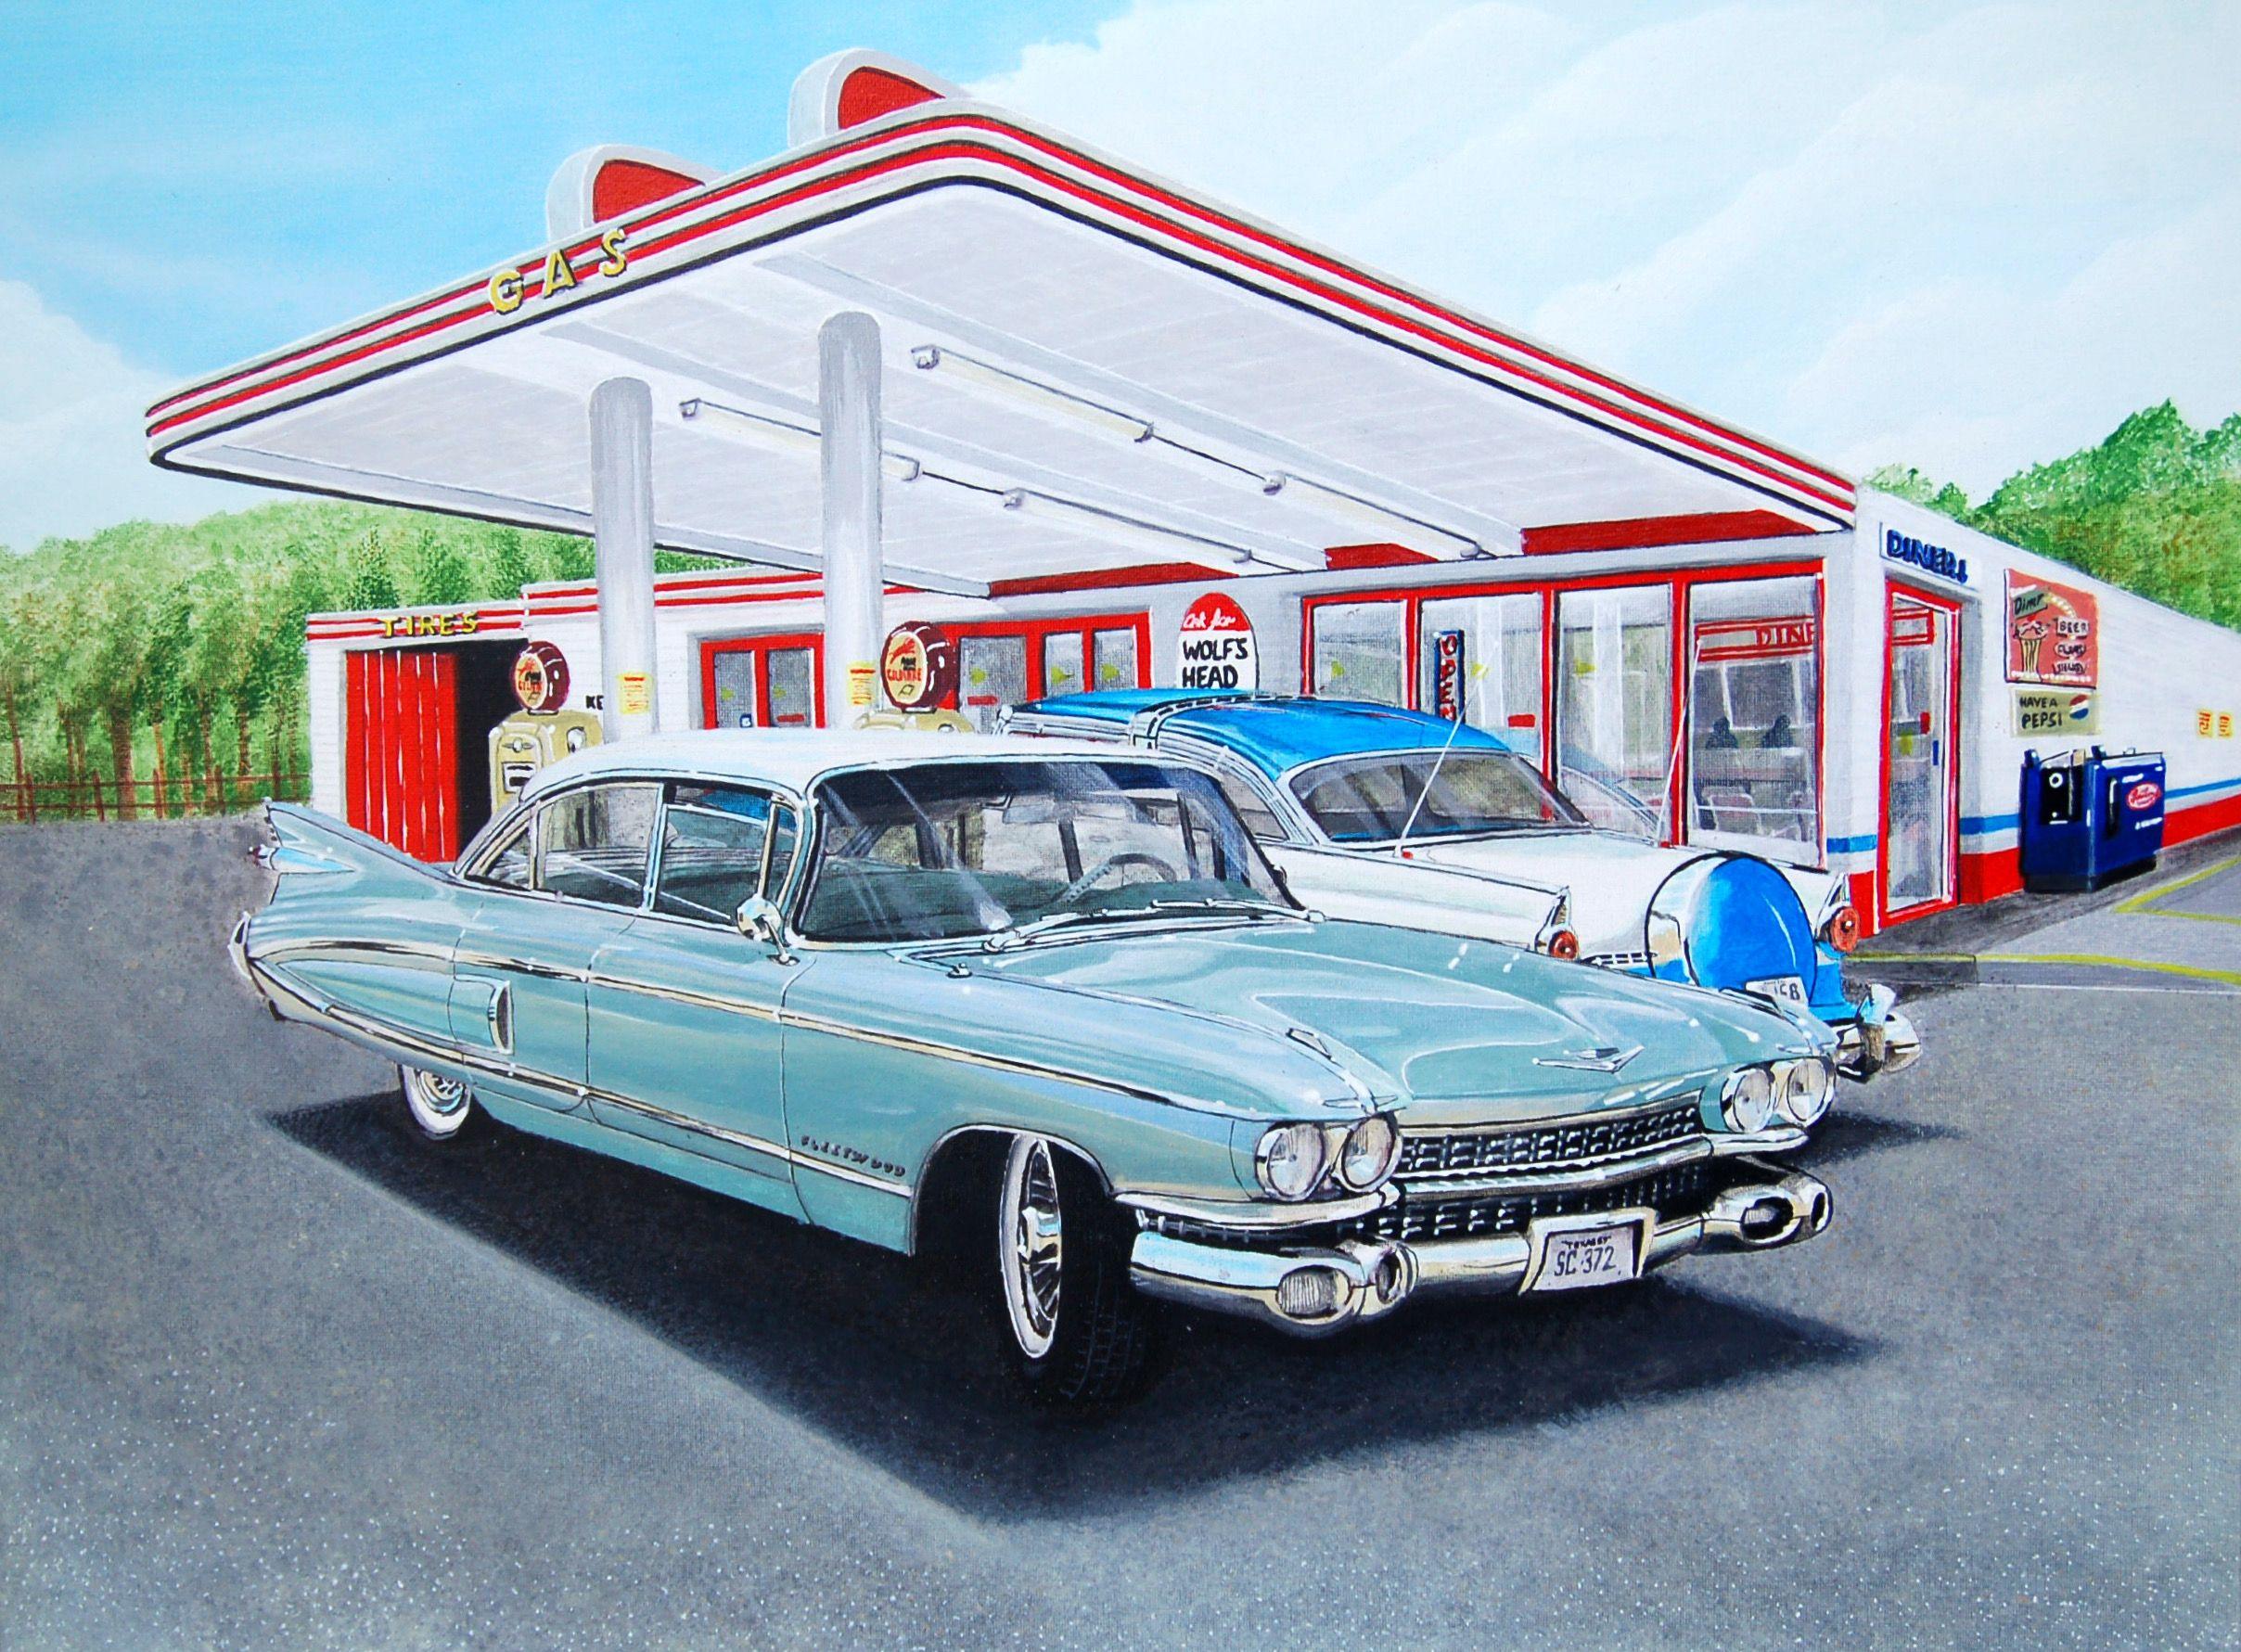 My acrylic painting of a 1959 Cadillac Fleetwood, set in a period gas station scenario :: Painting :: Realism :: This piece comes with an official certificate of authenticity signed by the artist :: Ready to Hang: No :: Signed: Yes :: Signature